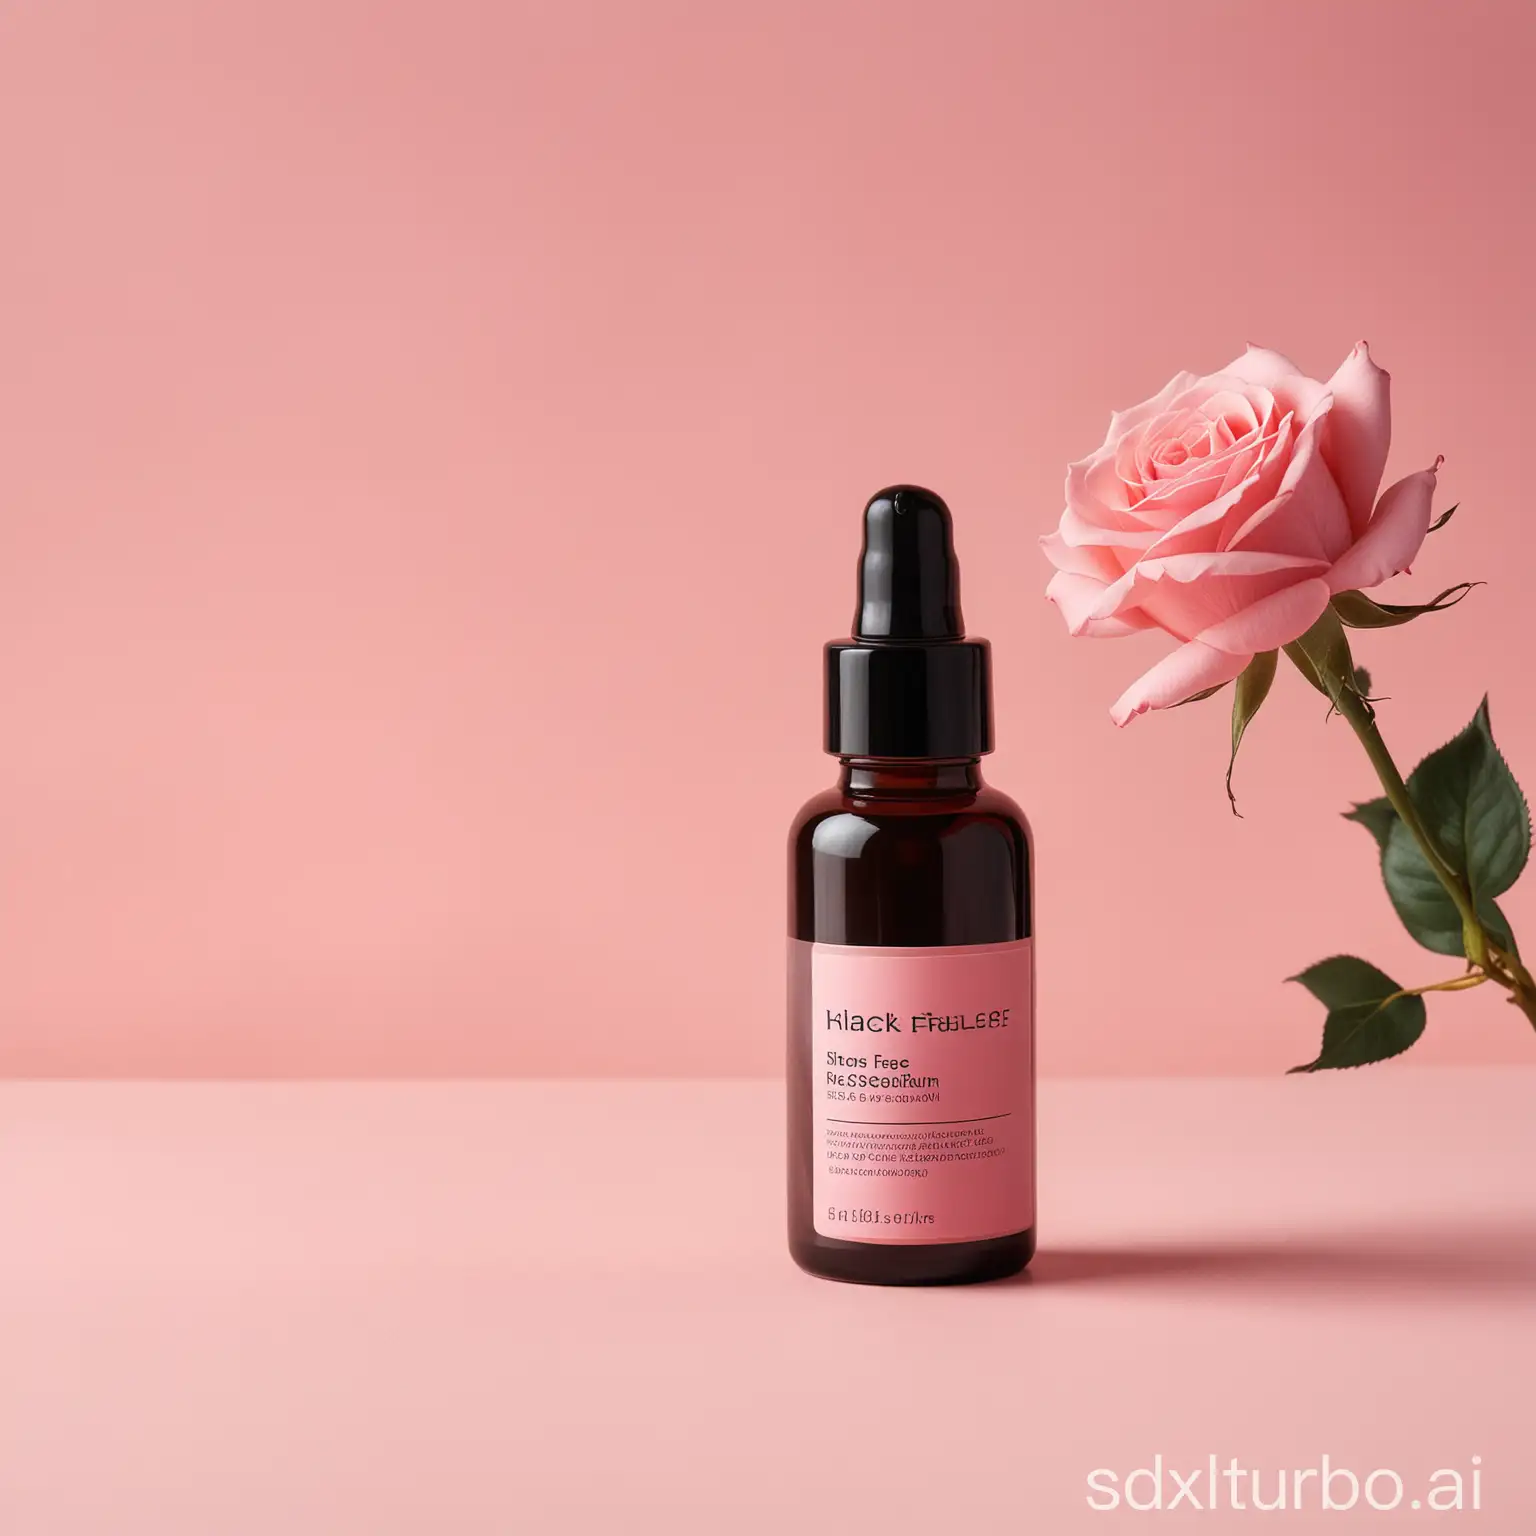 Black face rose serum bottle with blank label], aesthetic minimal composition, professional product photography, pastel background with sunlight